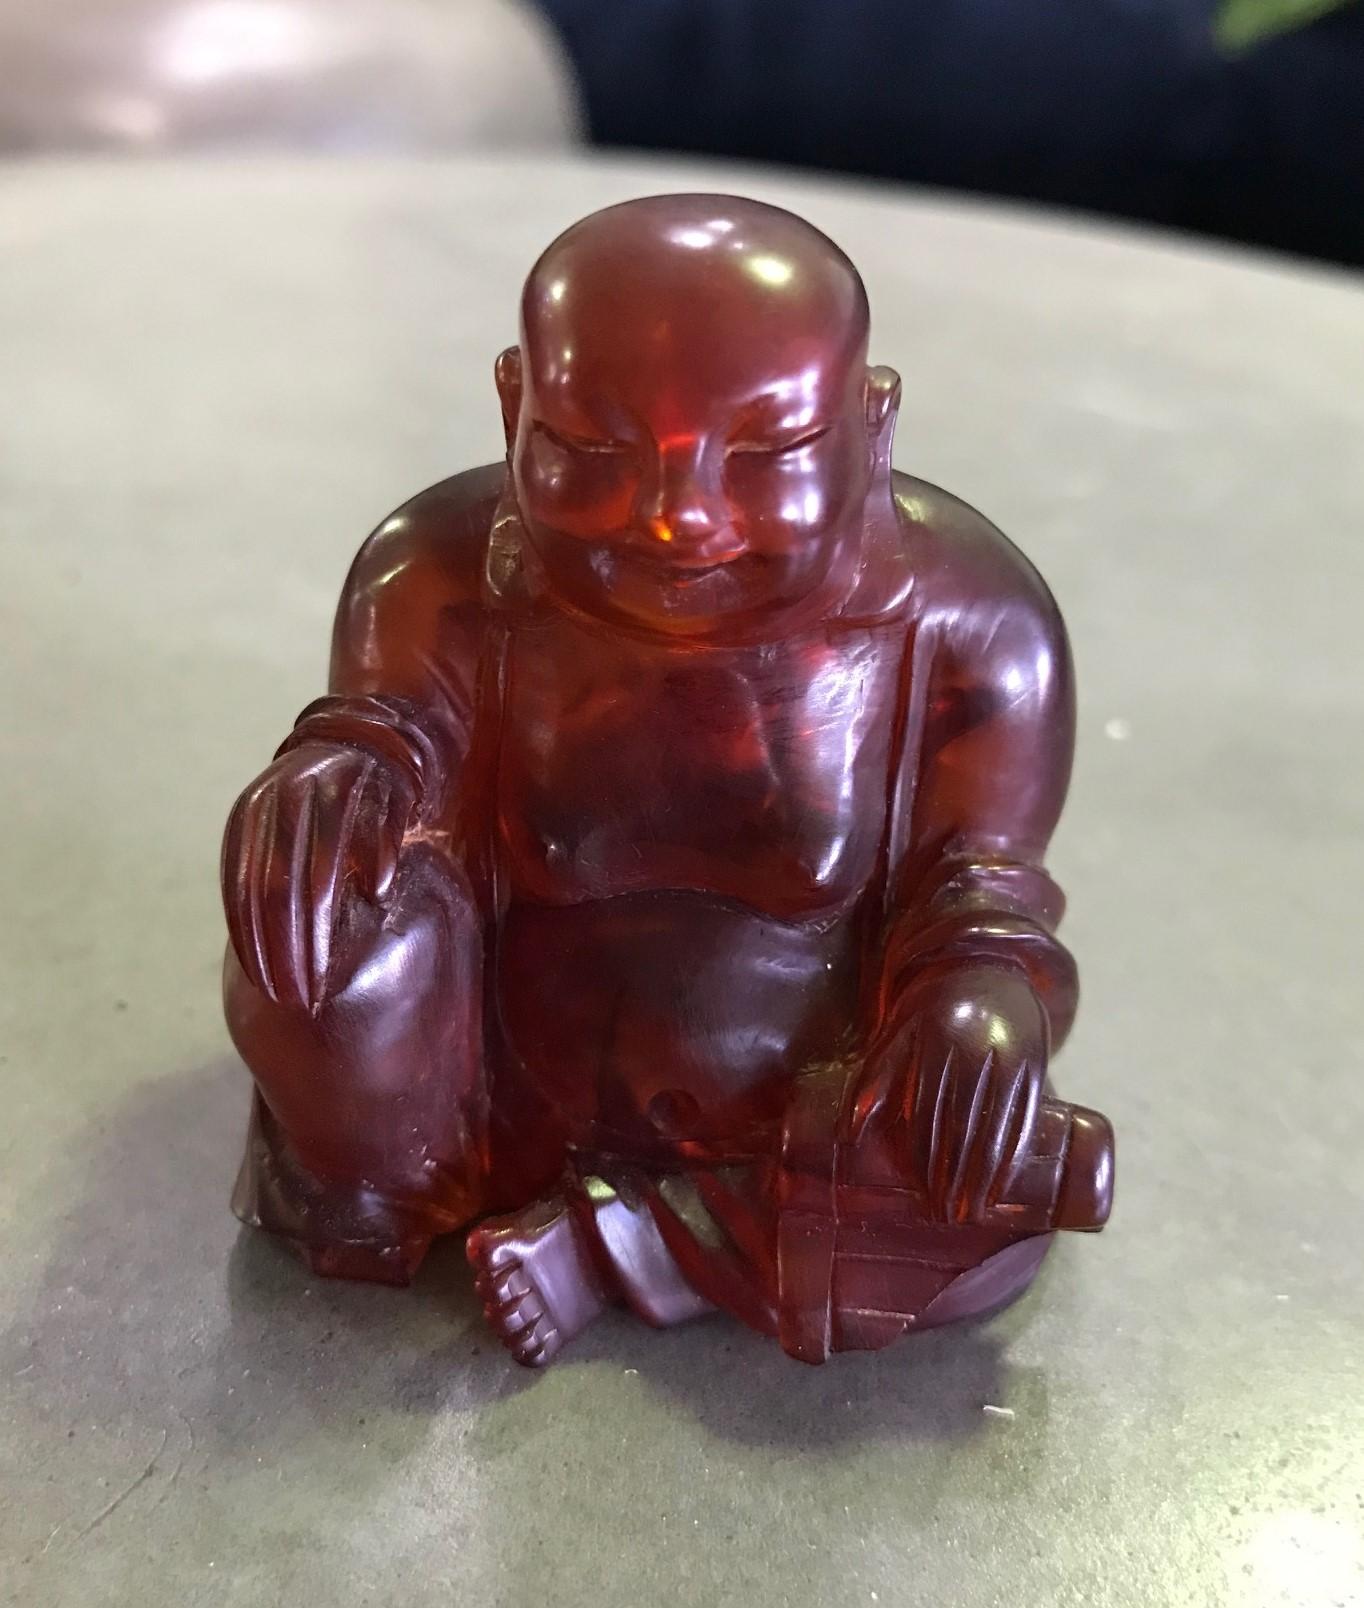 A pleasantly happy and serene pocket-sized seated Buddha. Nice details. Beautiful feel to it. 

Would make for a nice addition to any Asian art or artifacts collection or a very eye-catching stand-alone work.

Dimensions: 2